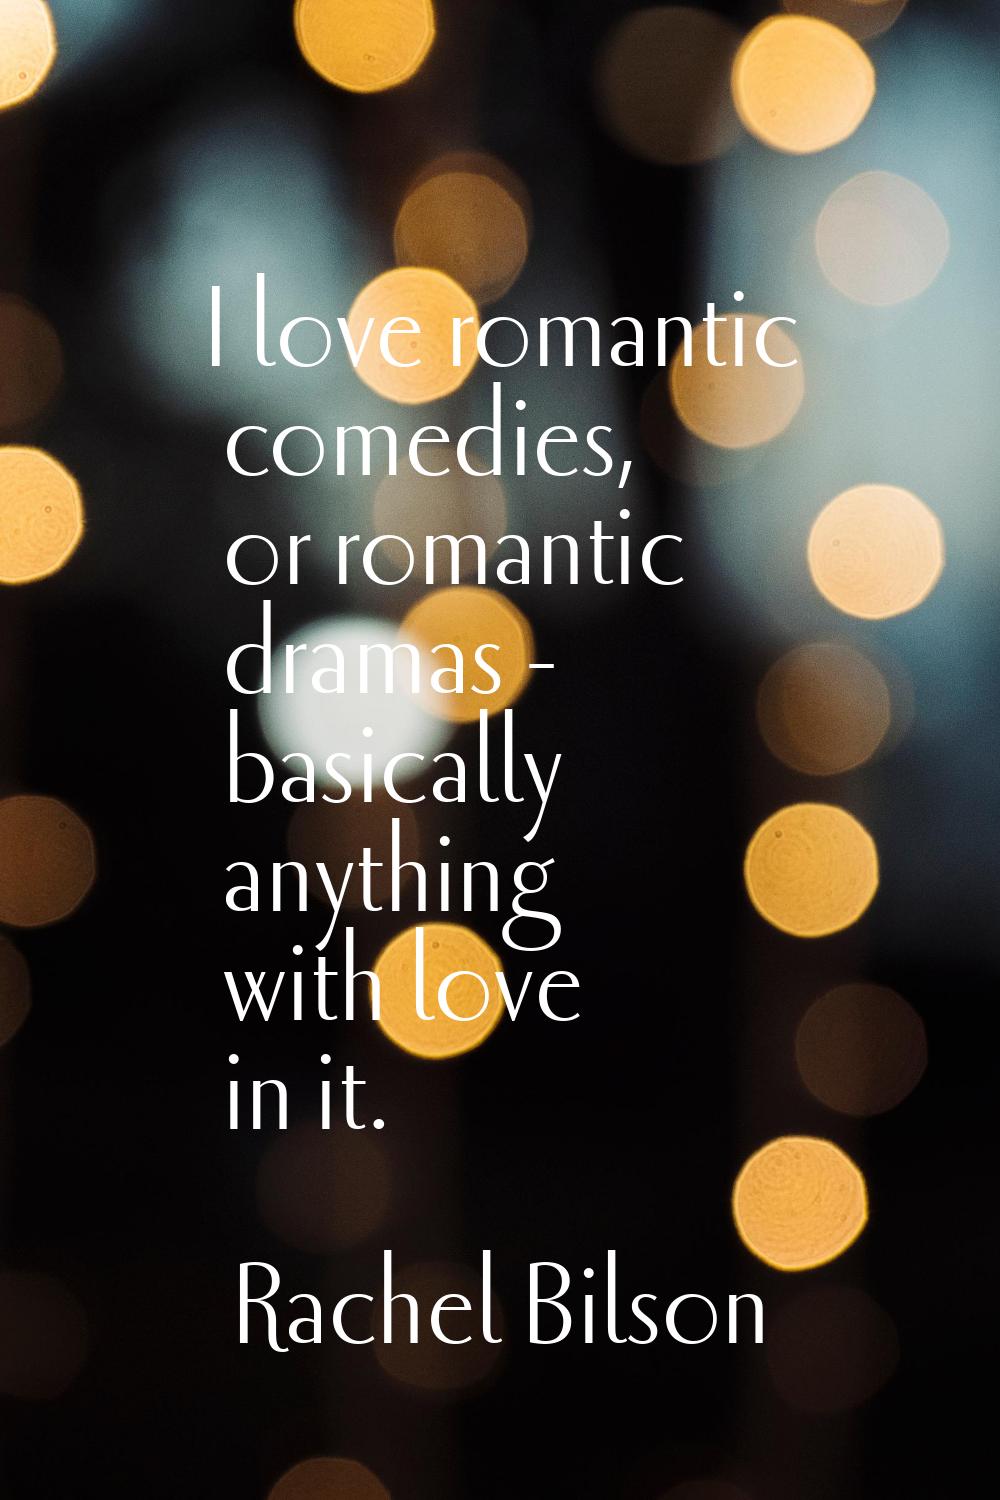 I love romantic comedies, or romantic dramas - basically anything with love in it.